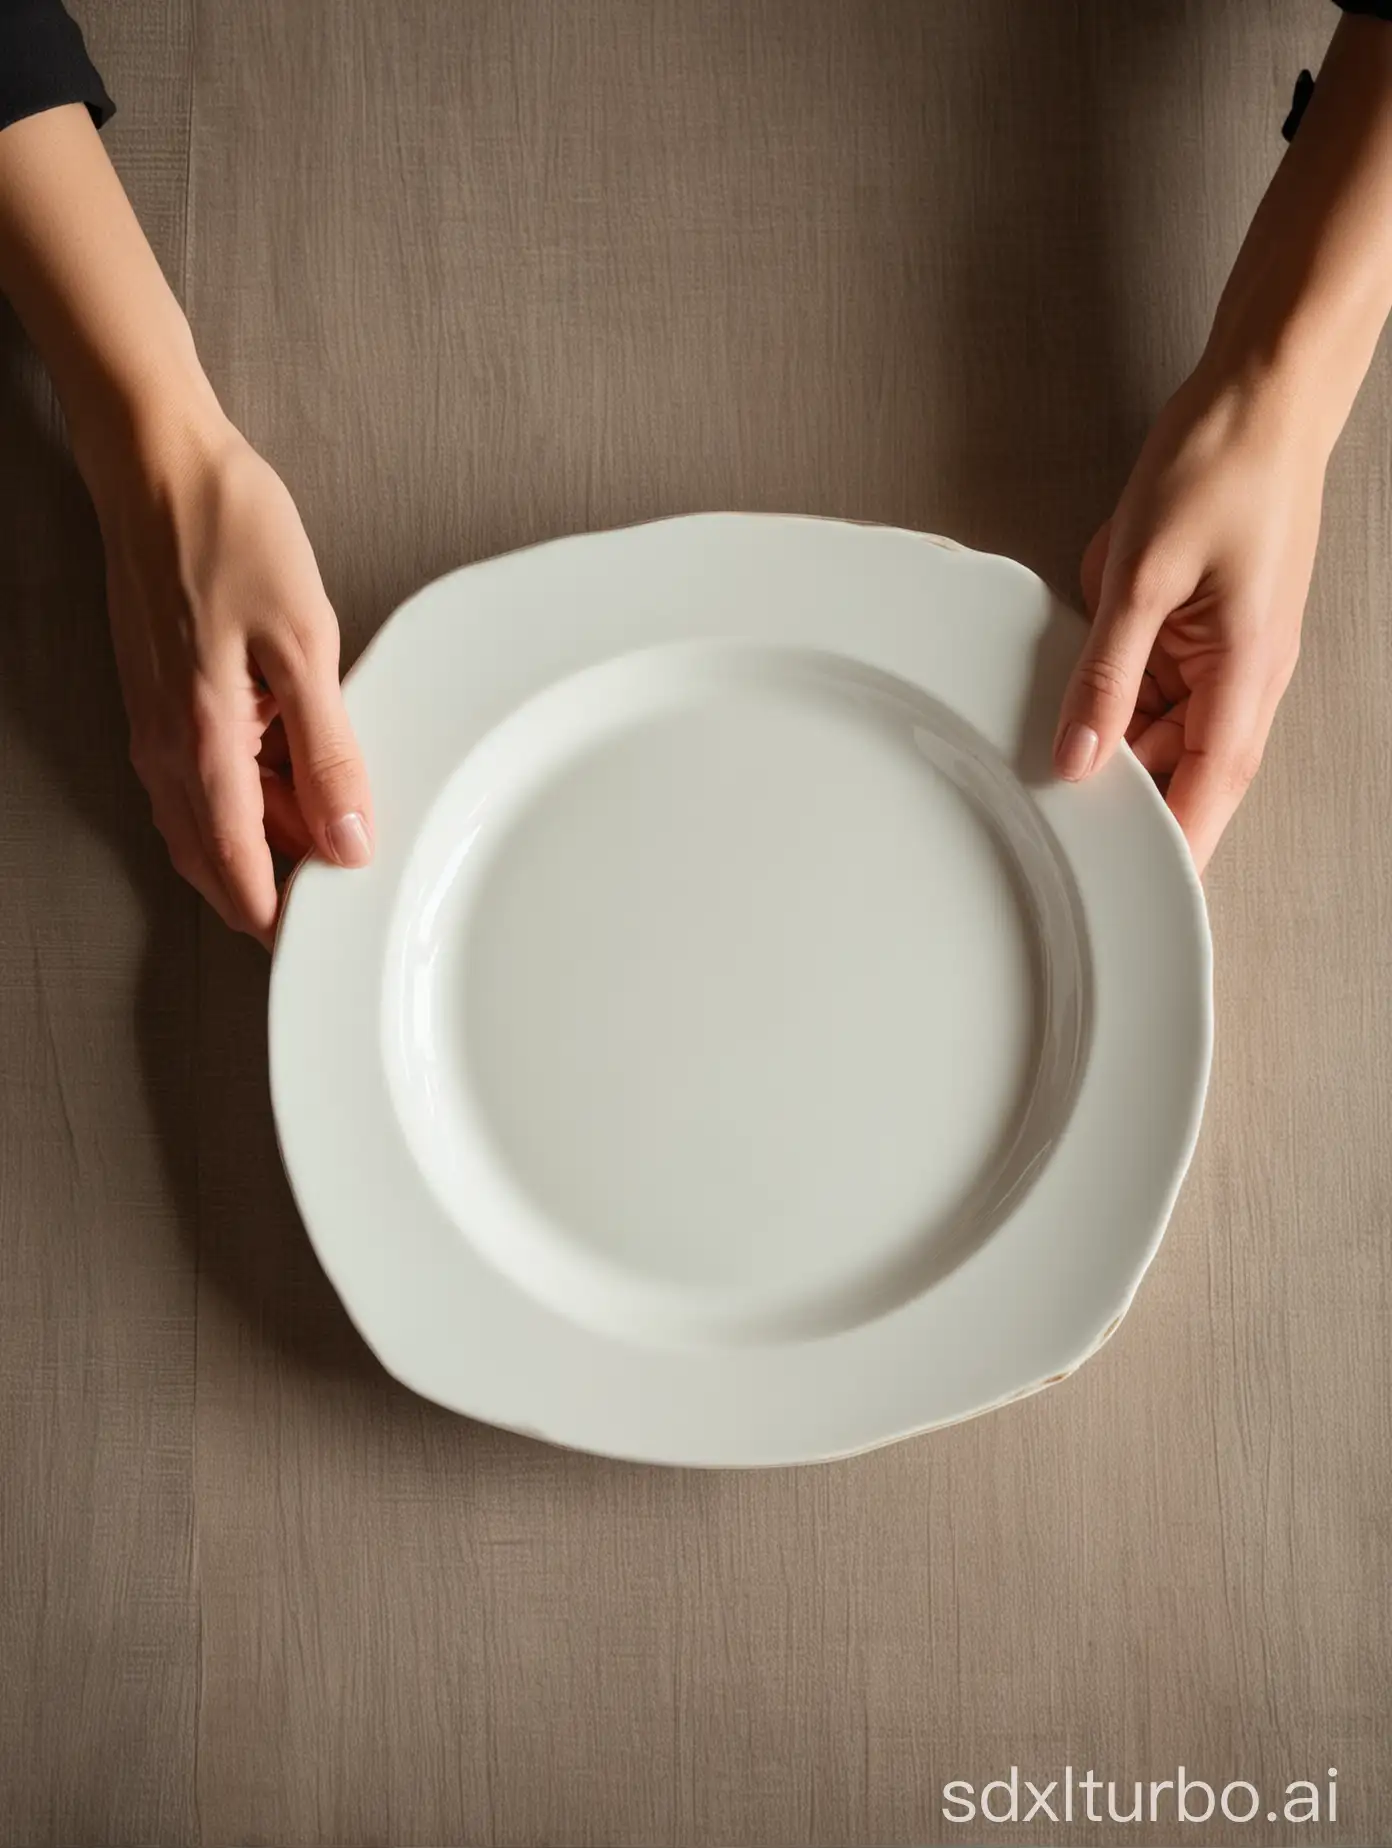 woman hands holding an empty plate on a table